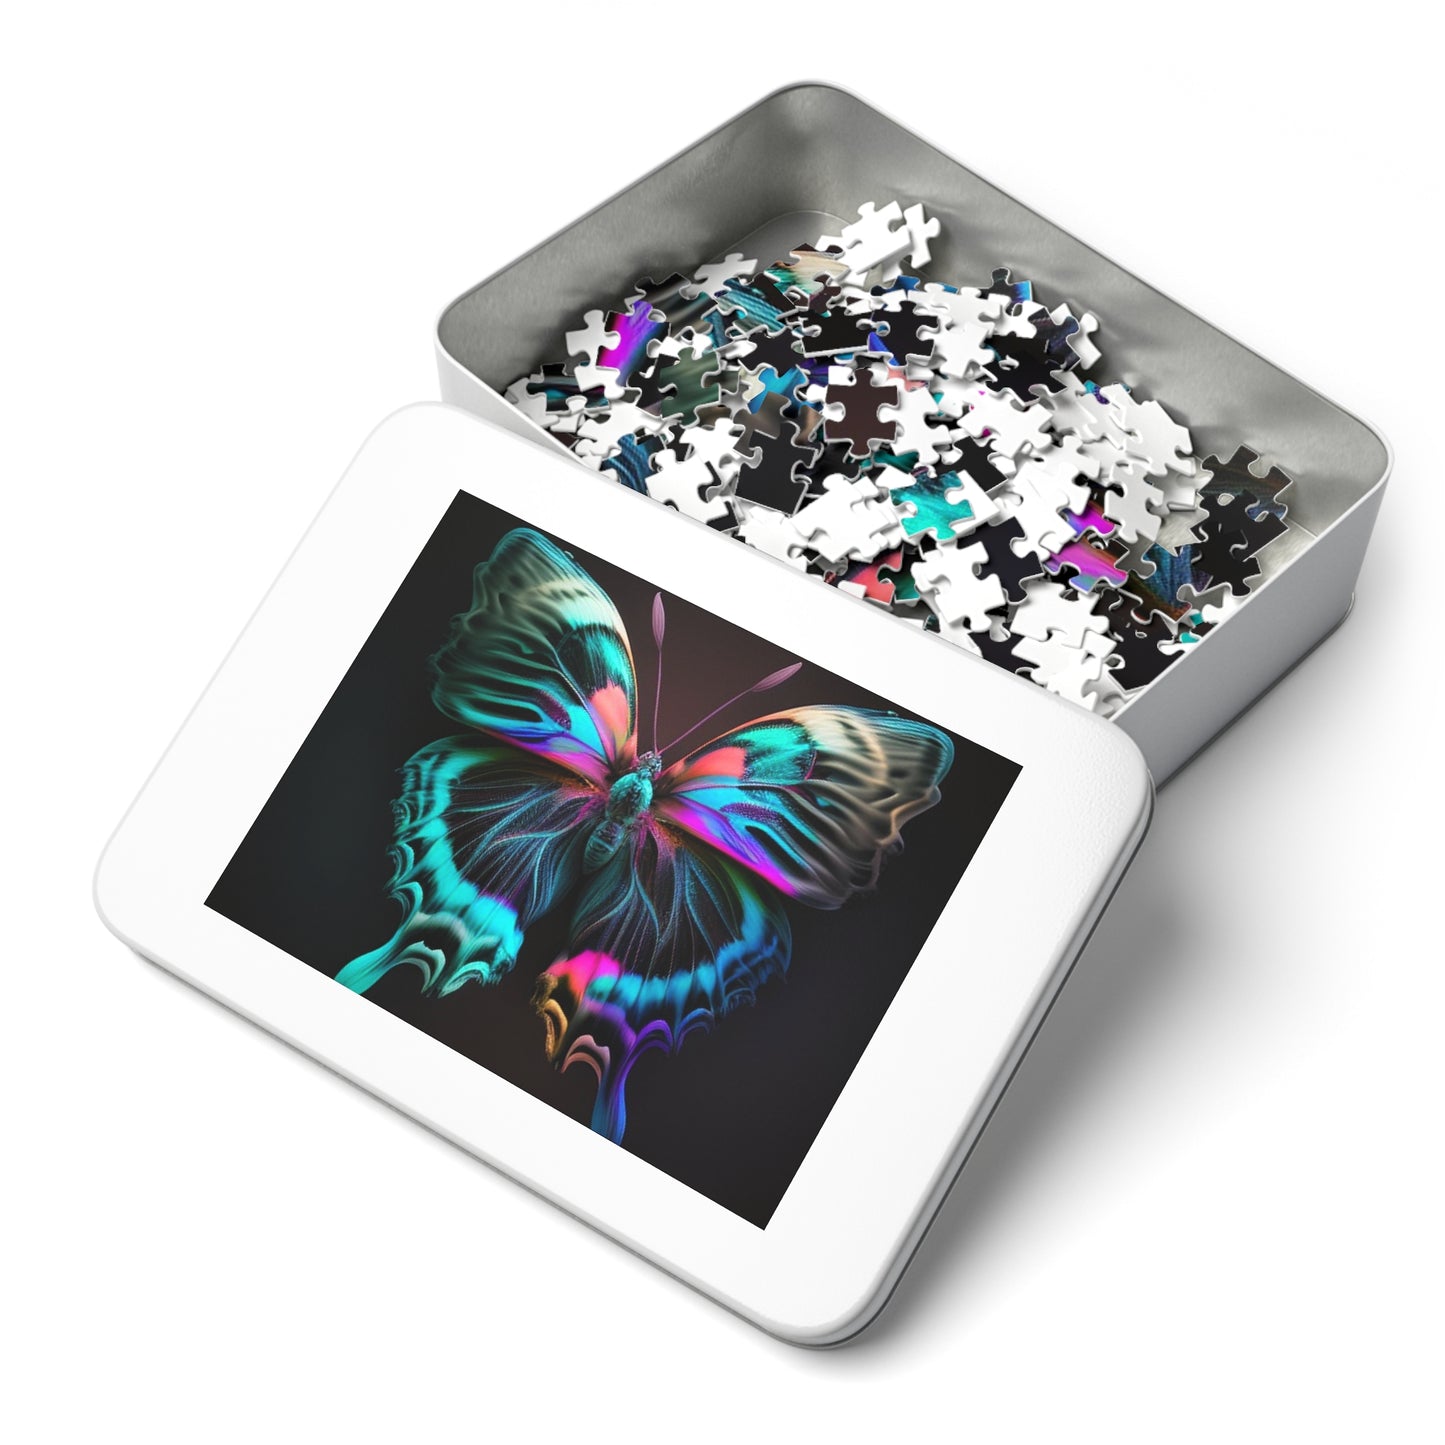 Jigsaw Puzzle (30, 110, 252, 500,1000-Piece) Neon Butterfly Fusion 3